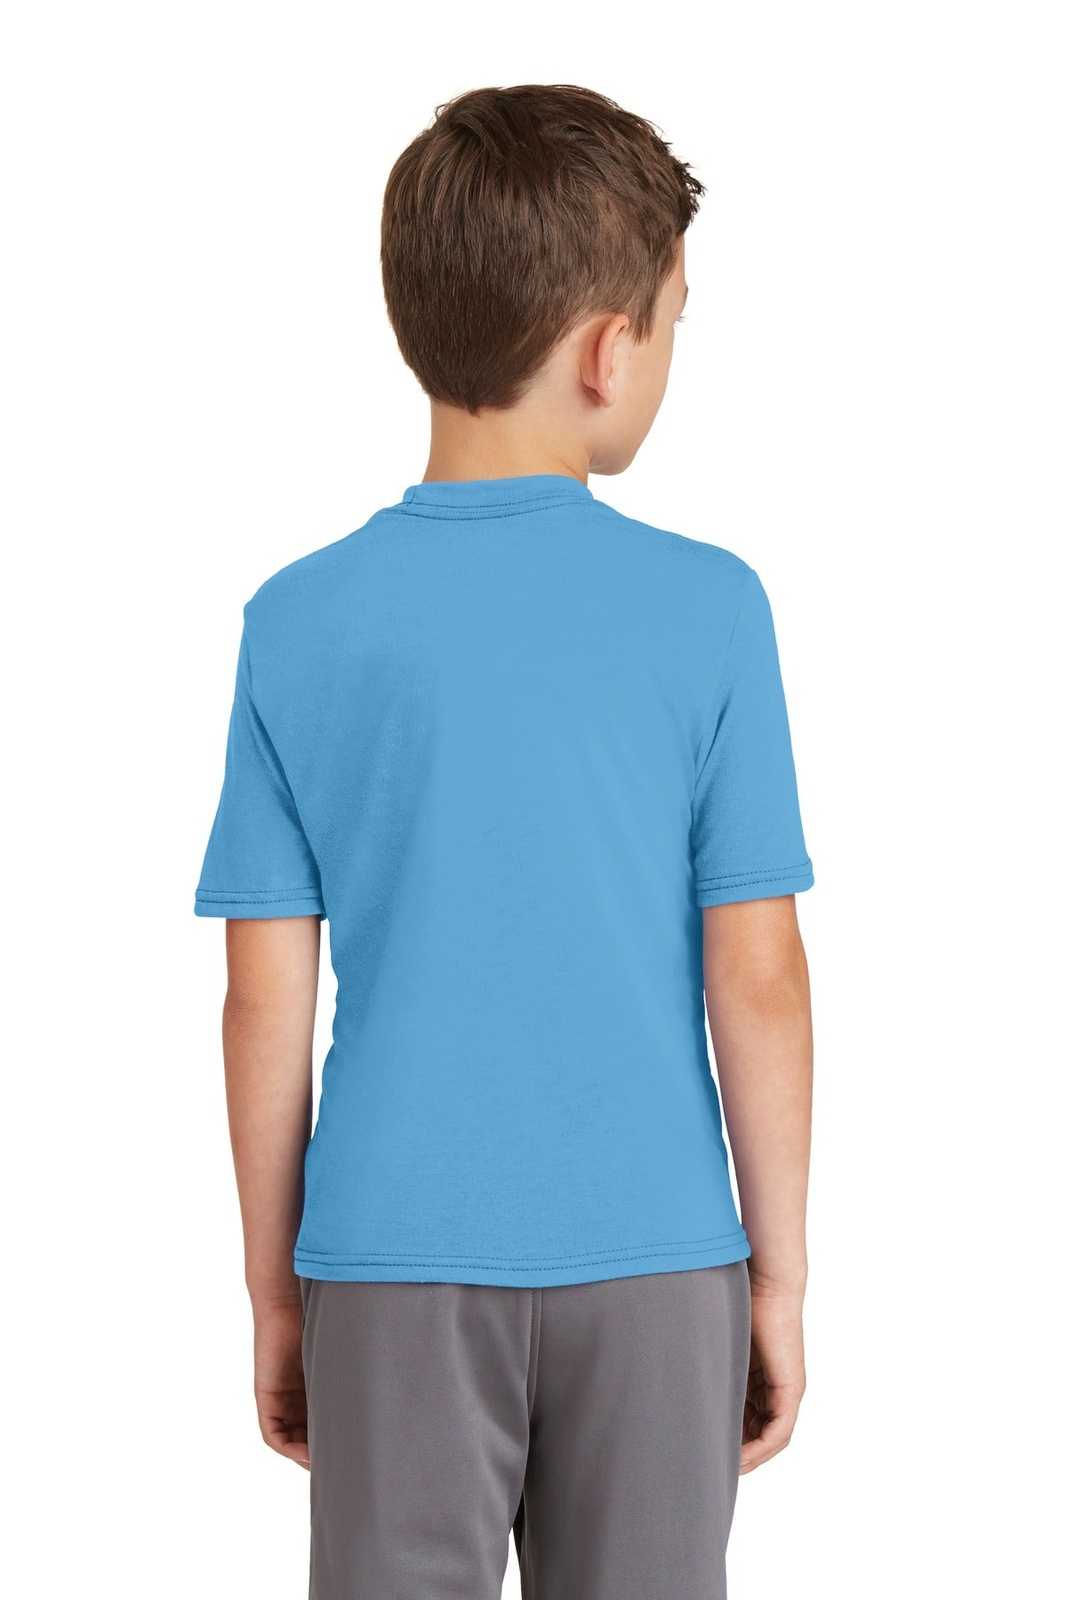 Port & Company PC381Y Youth Performance Blend Tee - Aquatic Blue - HIT a Double - 1